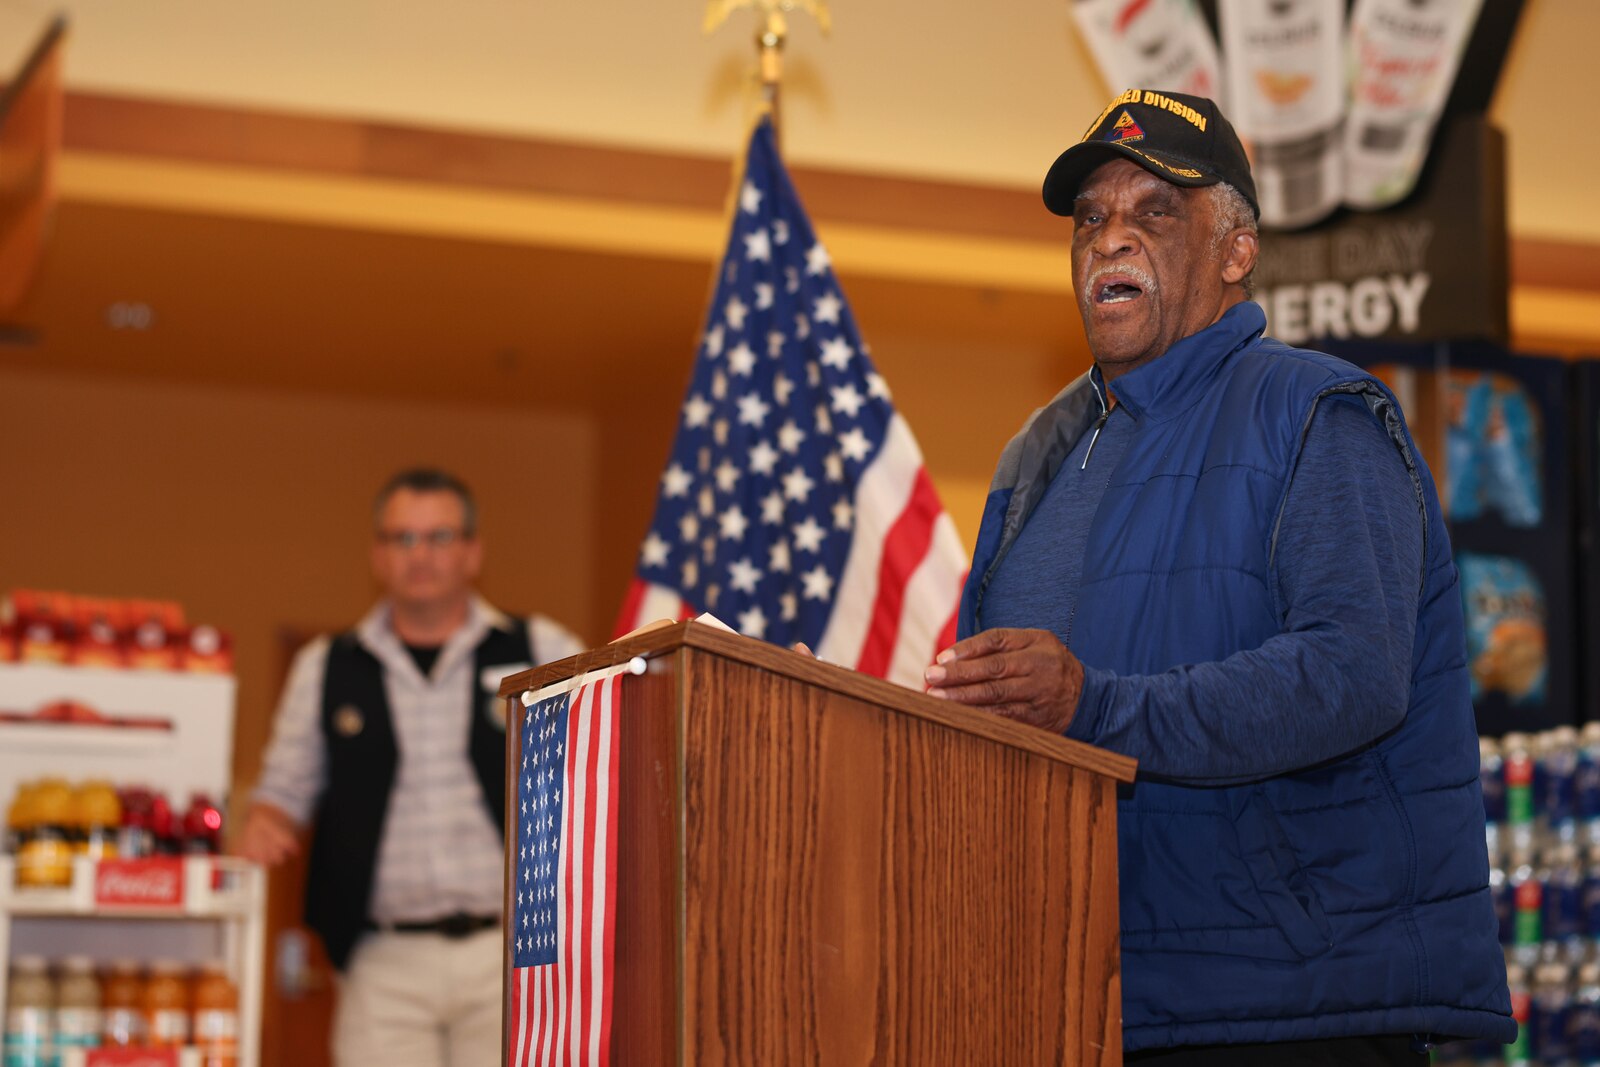 U.S. Army veteran Warren A. Thomas, the guest of honor, speaks during the Vietnam Veterans Day Ceremony at the Quantico Commissary on Marine Corps Base Quantico, Virginia, March 29, 2024. The Defense Commissary Agency partnered with The United States of America Vietnam War Commemoration to thank and honor Vietnam veterans and their families for their service and sacrifice on behalf of the nation. (U.S. Marine Corps photo by Lance Cpl. David Brandes)